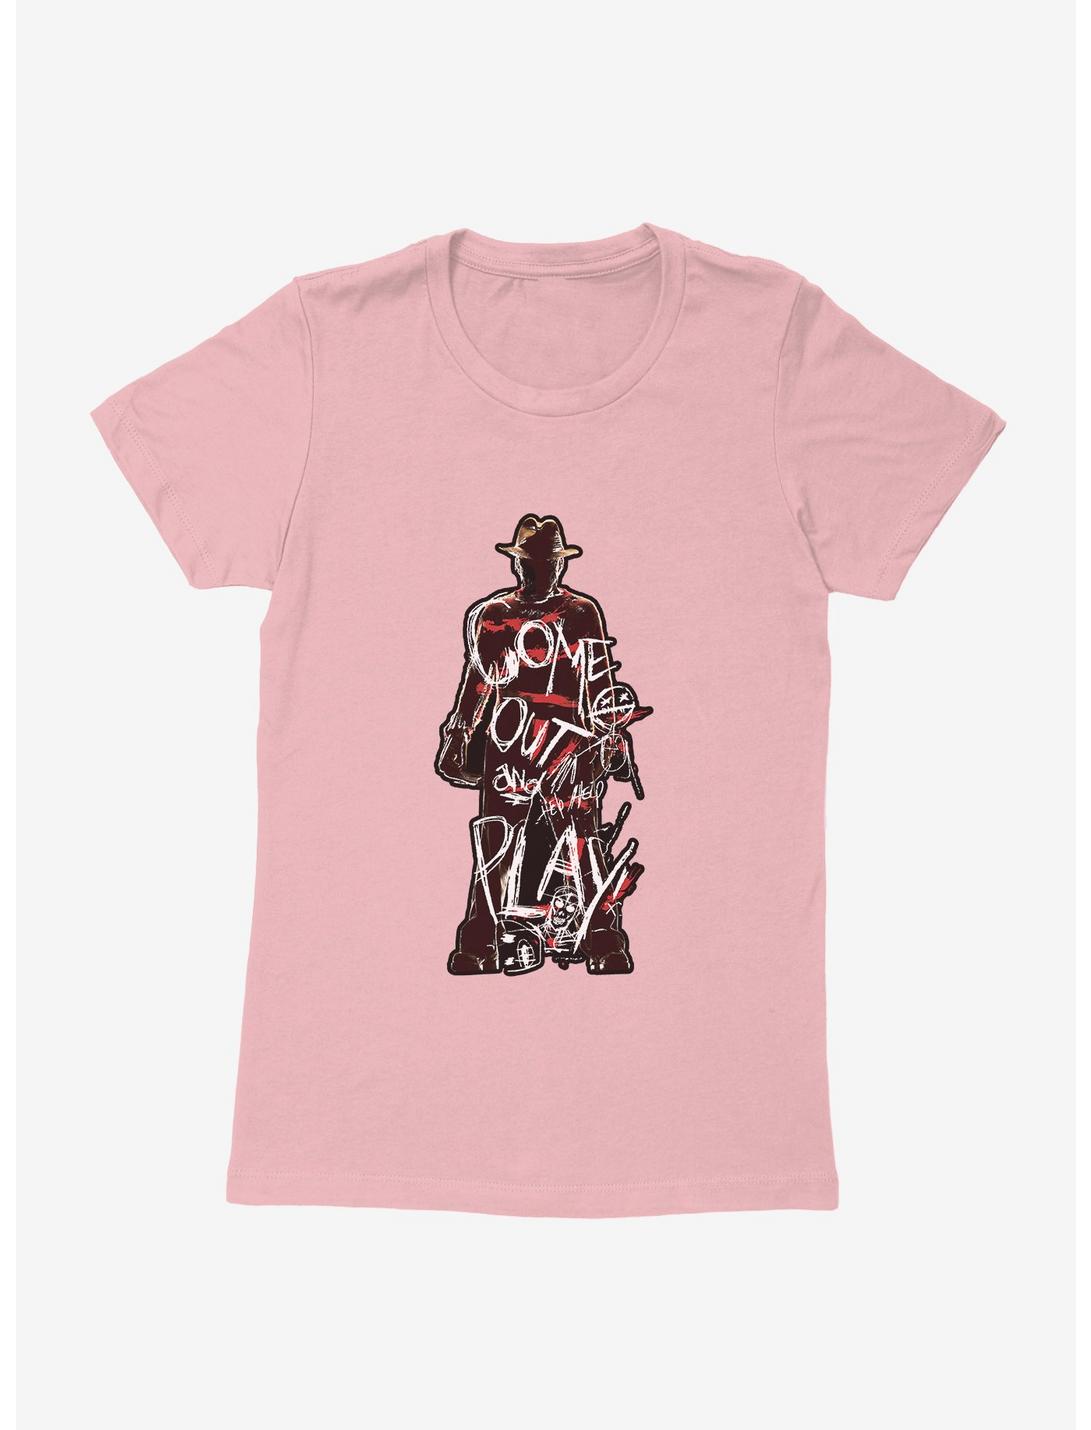 A Nightmare On Elm Street Come Out And Play Womens T-Shirt, LIGHT PINK, hi-res